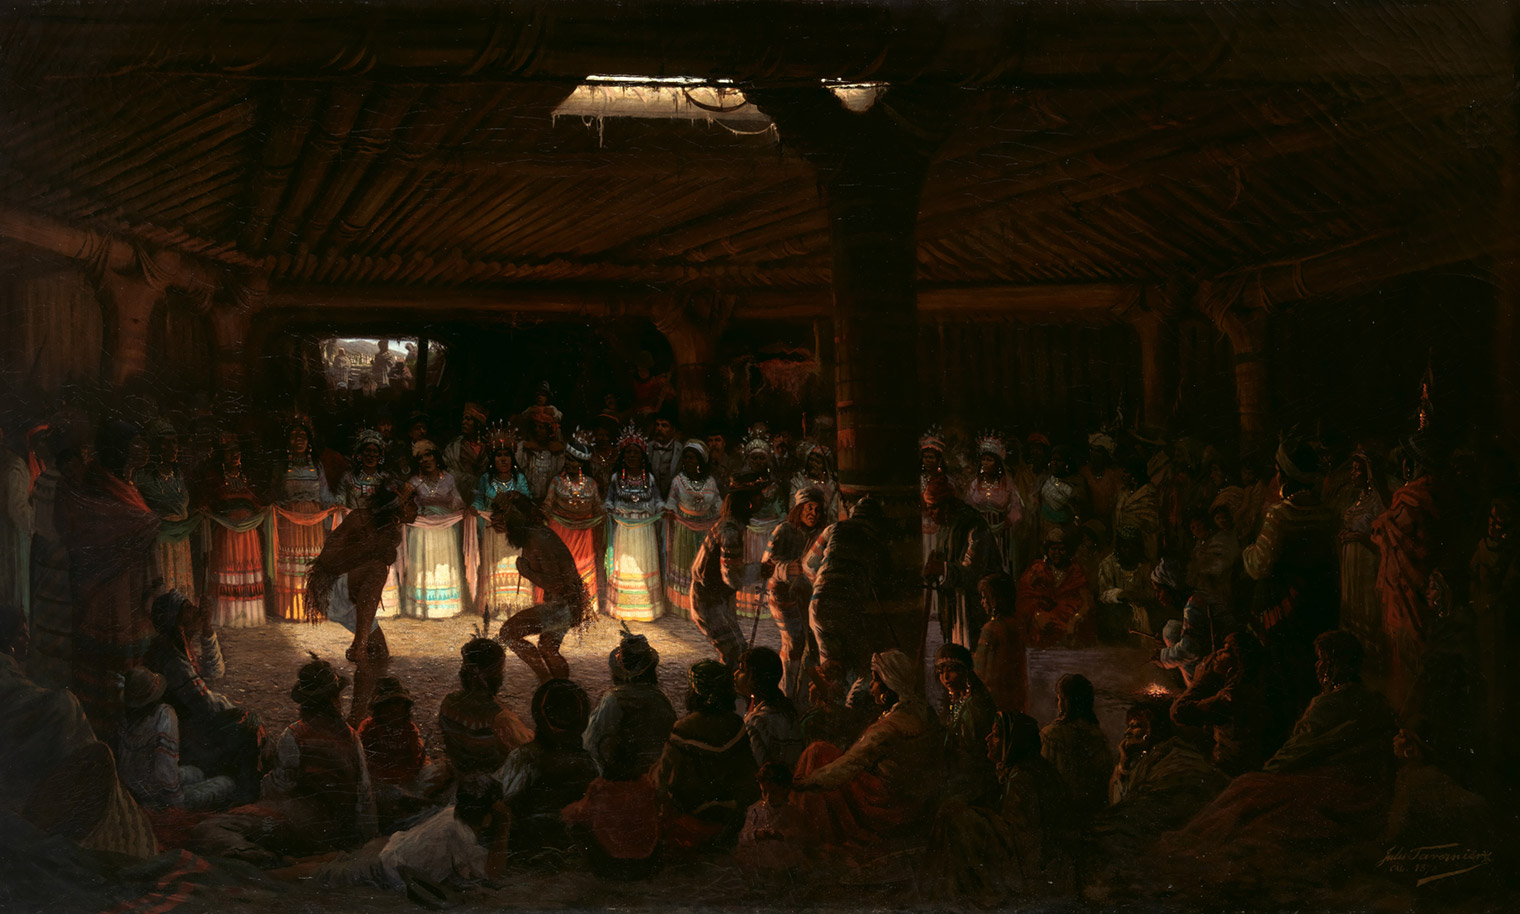 A painting of a dark room lit by a fire, with dancers